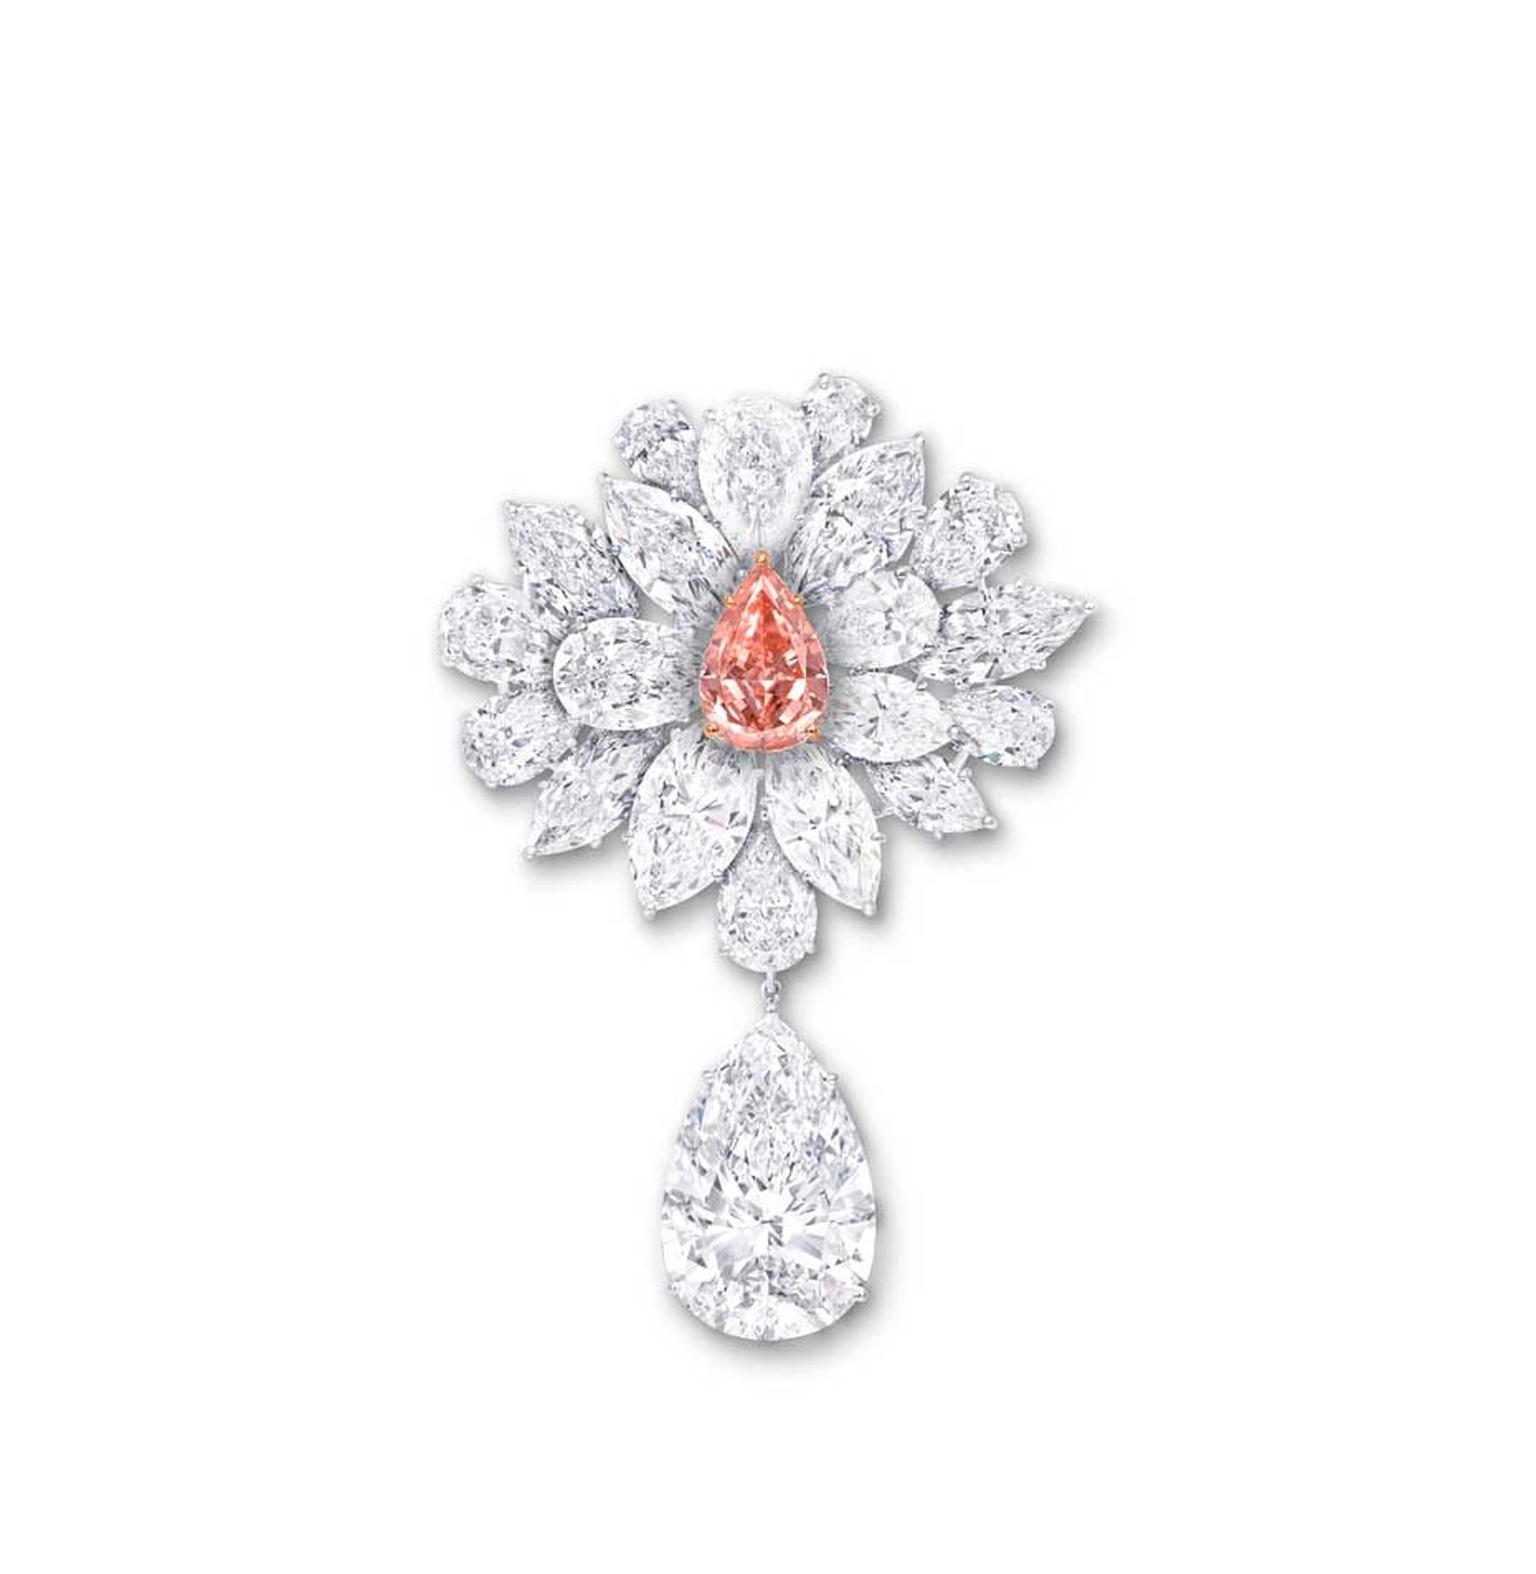 Graff's Diamond Flower Brooch, unveiled at the 2014 Biennale des Antiquaires in Paris, features an 8.97ct pear-shaped Fancy Vivid Pink Orange diamond, surrounded by a spray of white diamond petals and leaves.